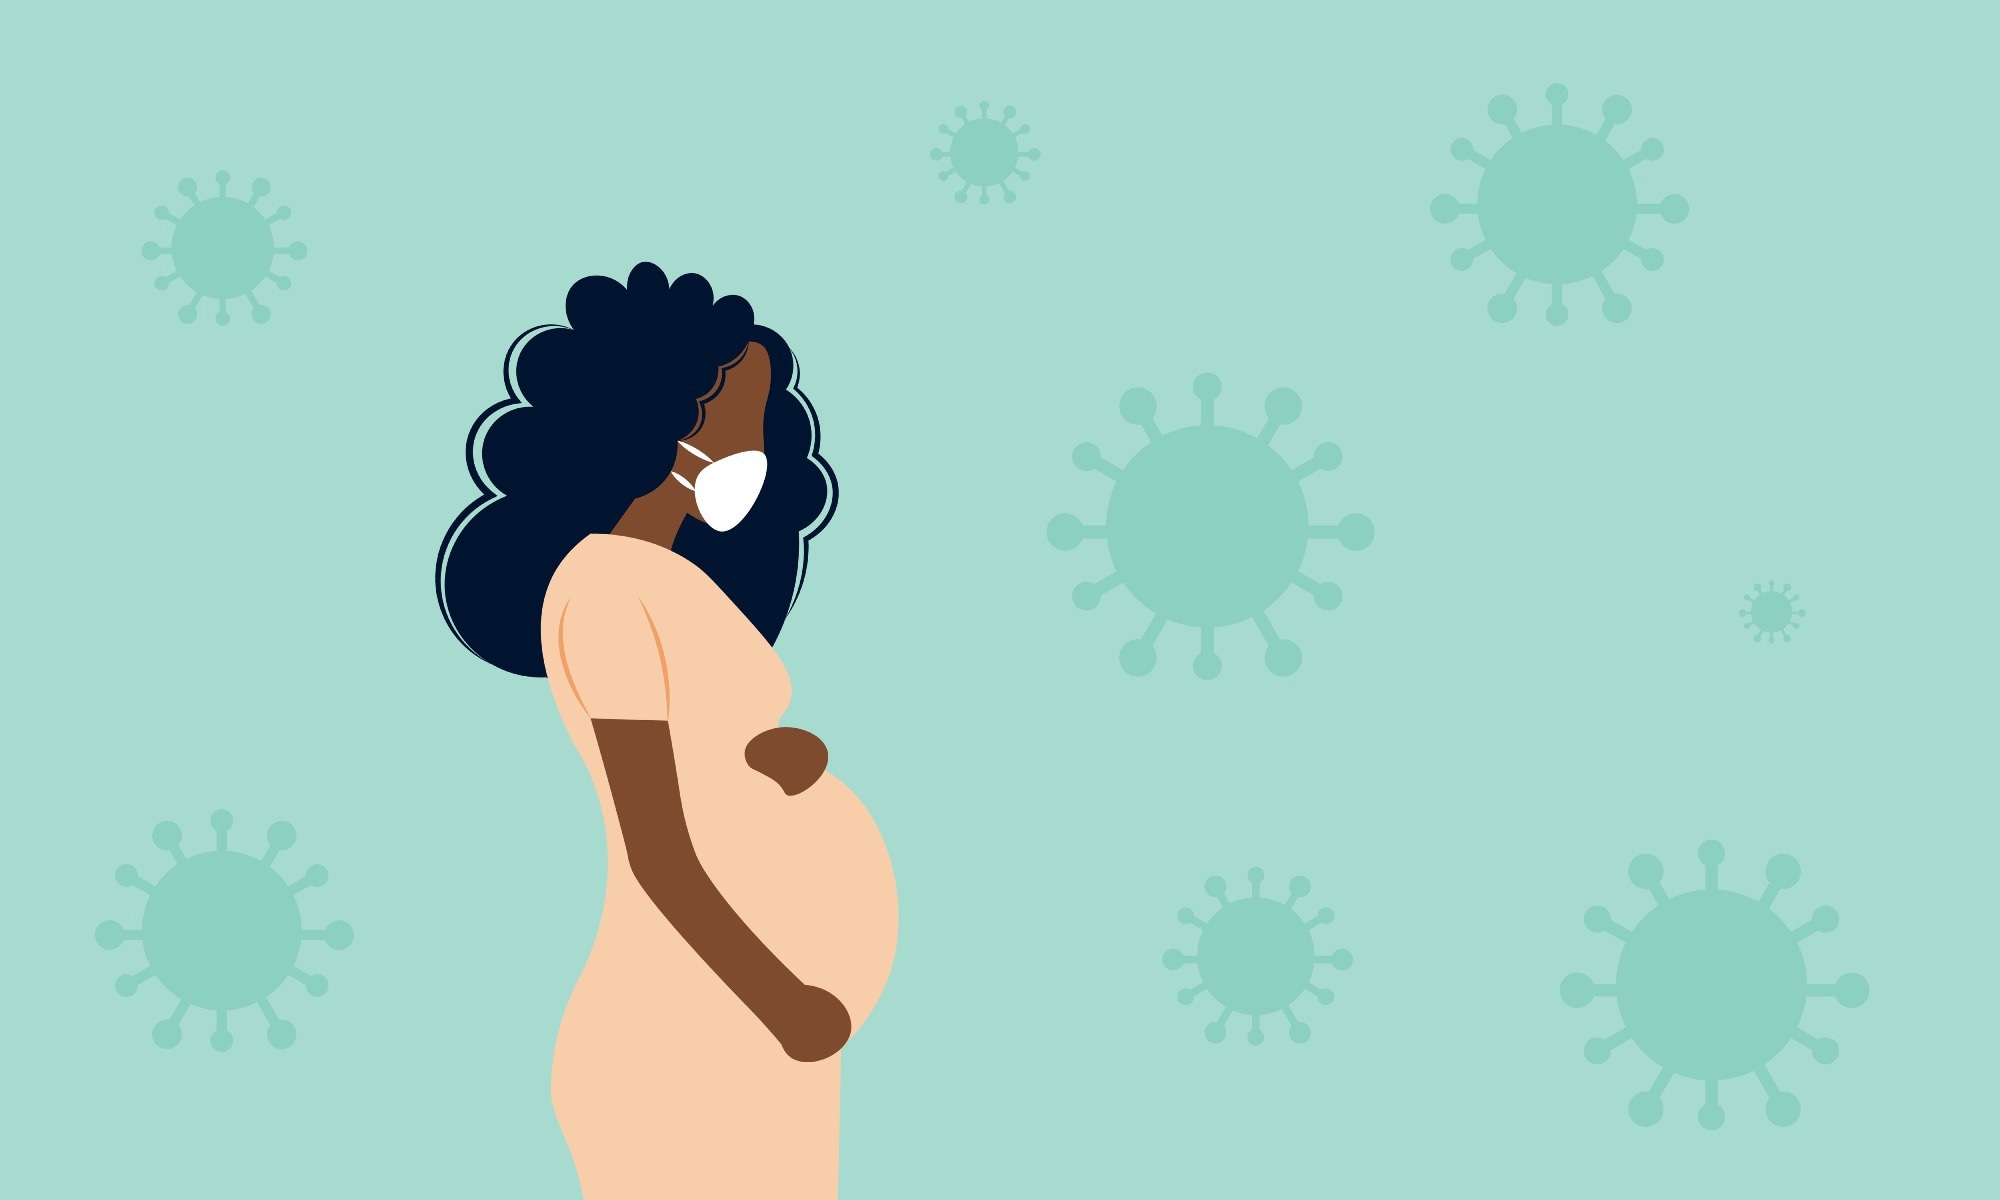 Study: SARS-CoV-2 seroprevalence and longitudinal antibody response following natural infection in pregnancy: a prospective cohort study. Image Credit: M M Vieira/Shutterstock